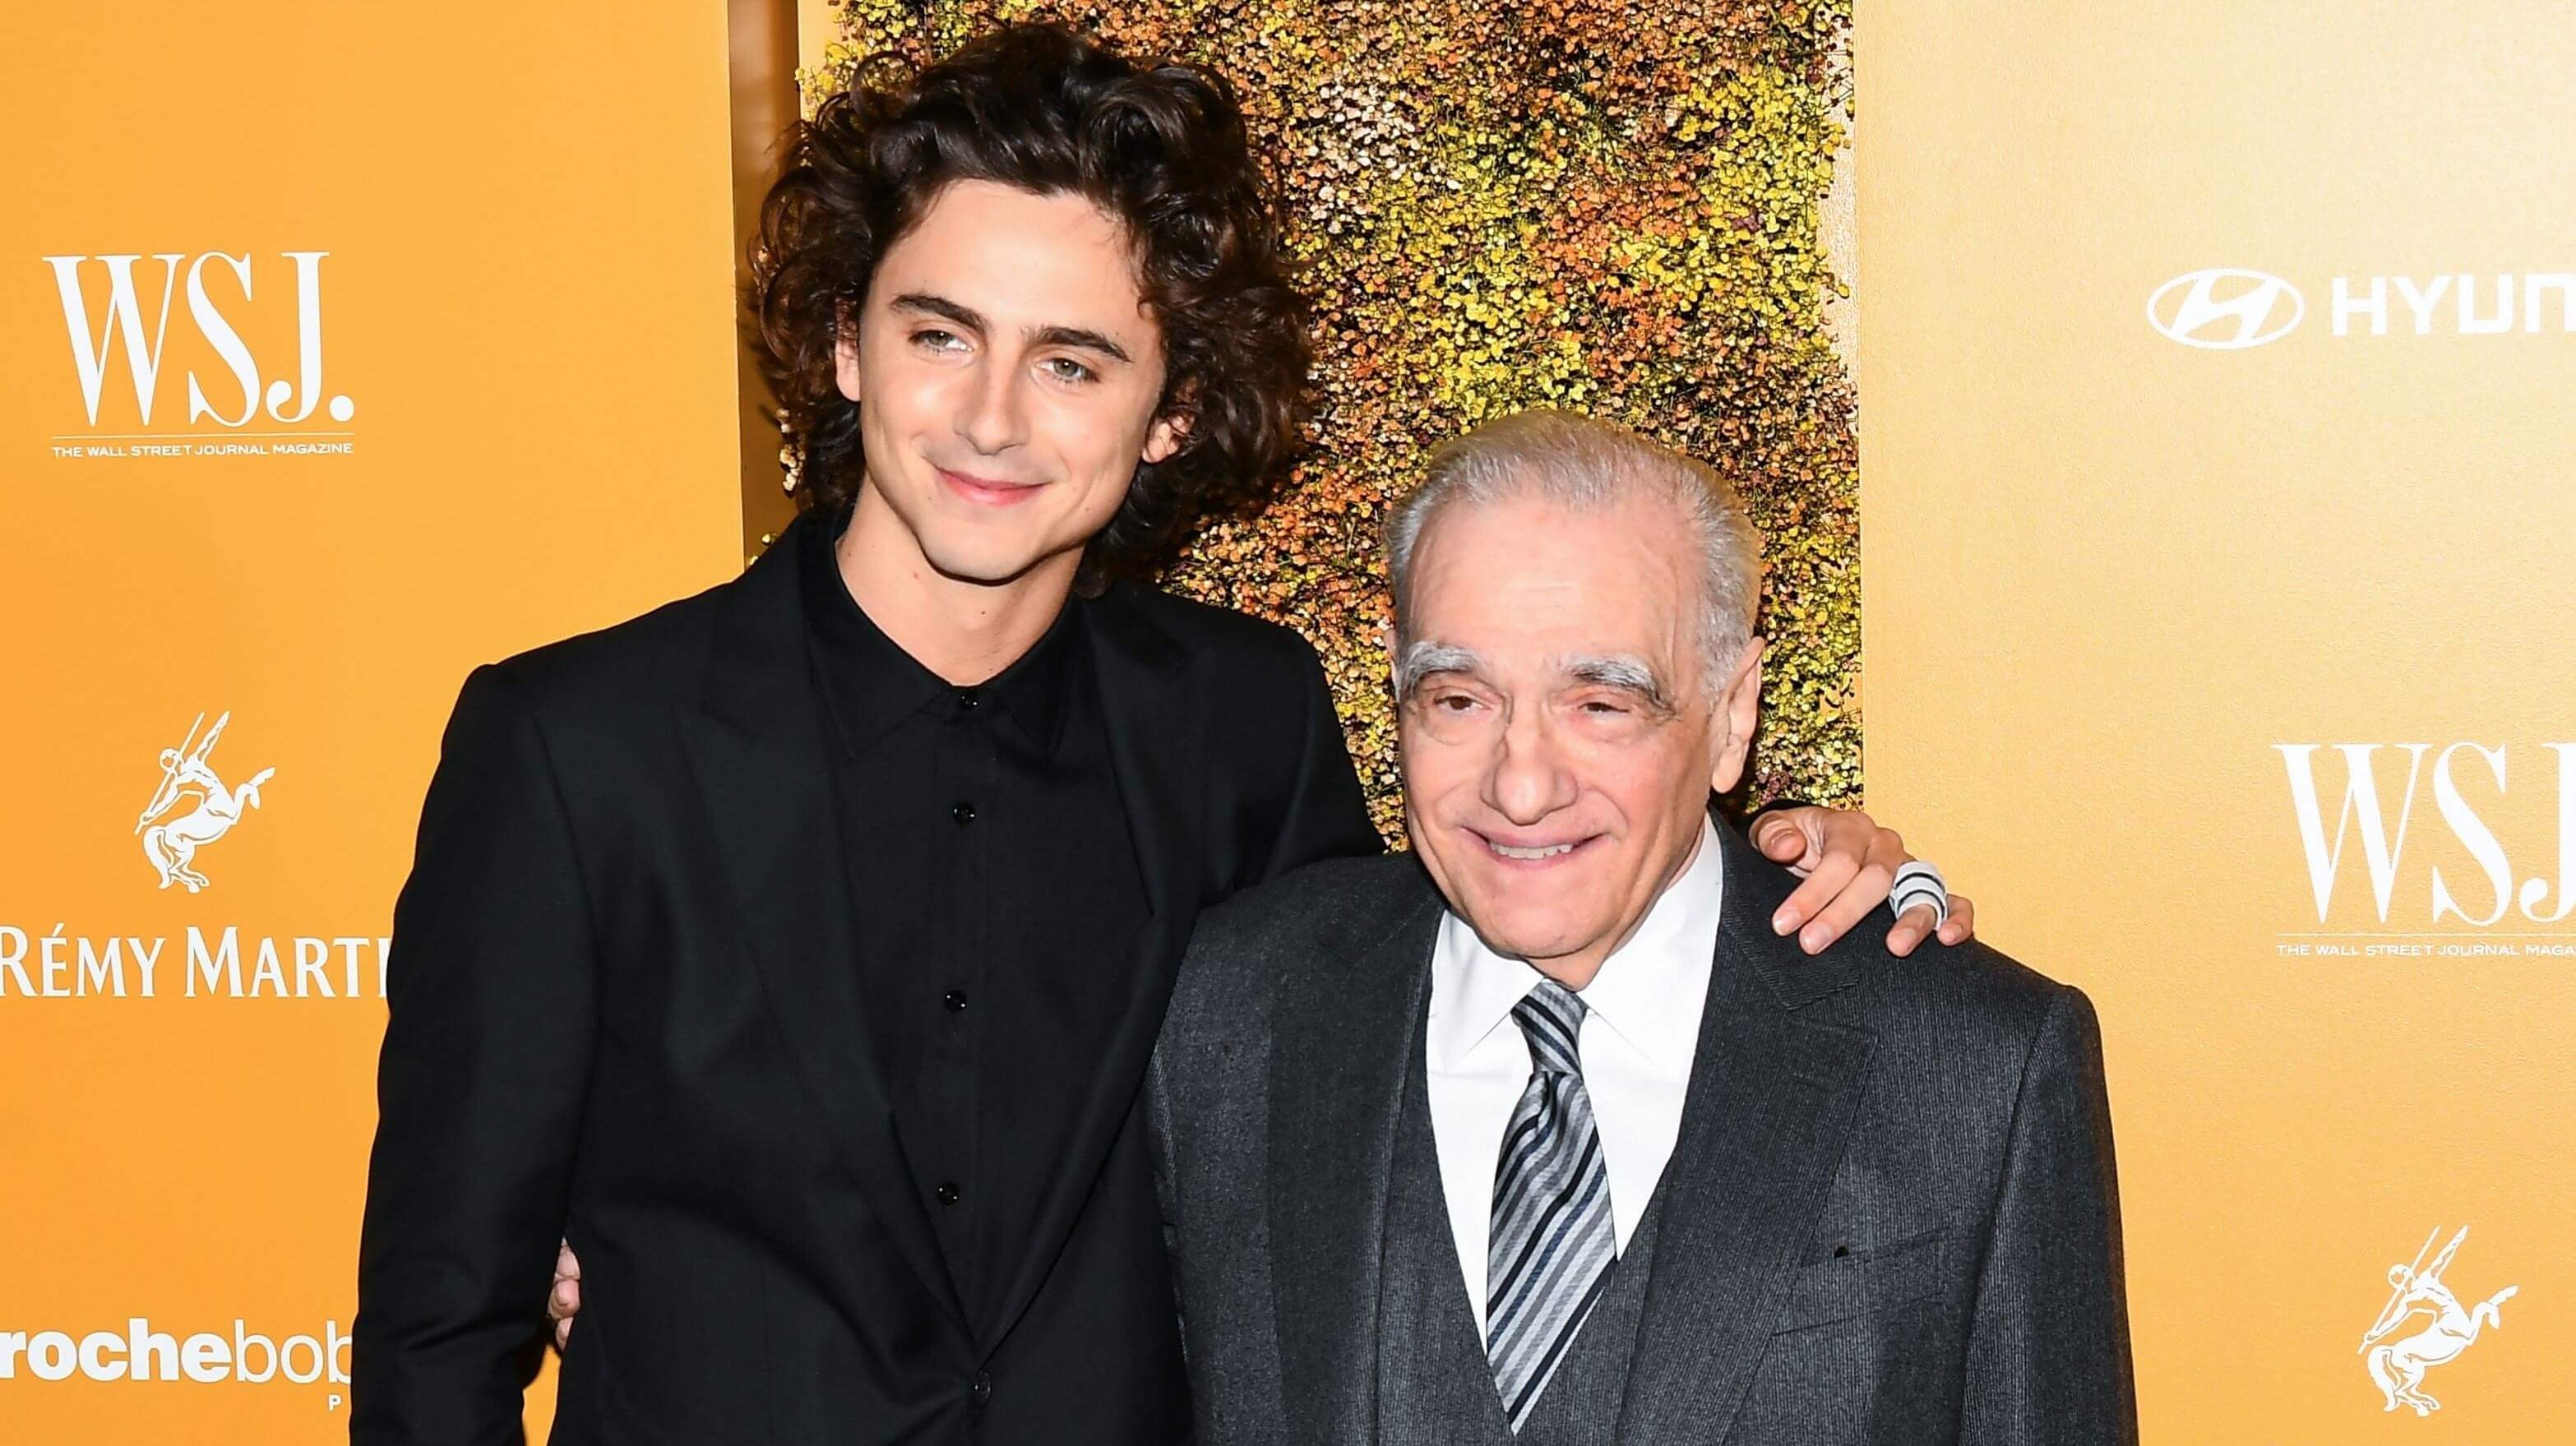 Martin Scorsese’s perfume ad with Timothée Chalamet is finally (actually!) here